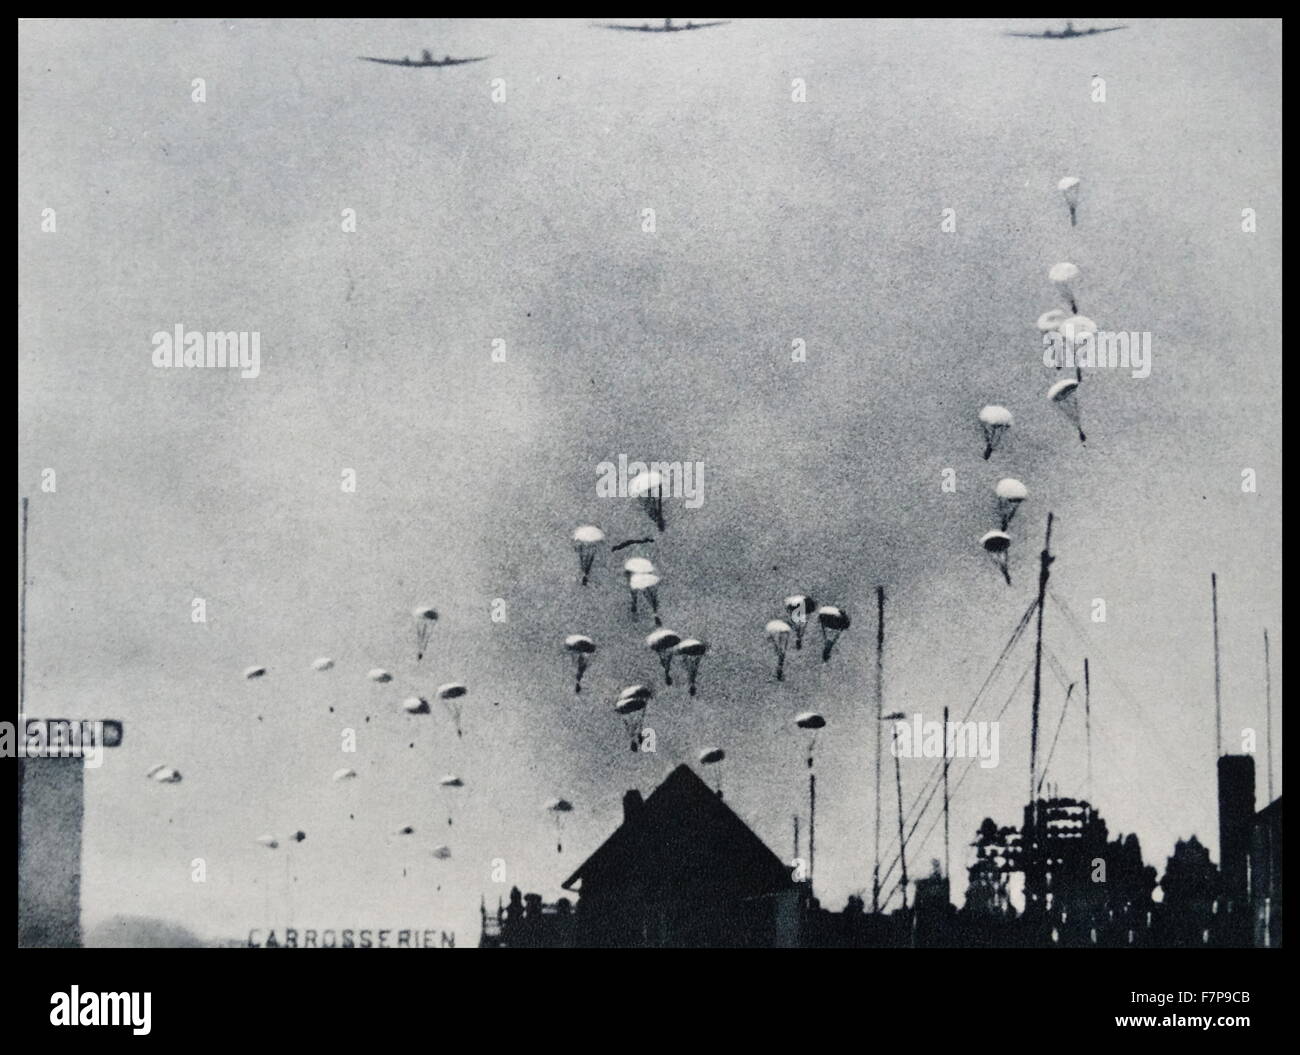 German paratroopers descend in to rotterdam, holland. Taken during the invasion of Holland, by German forces in 1940. Stock Photo